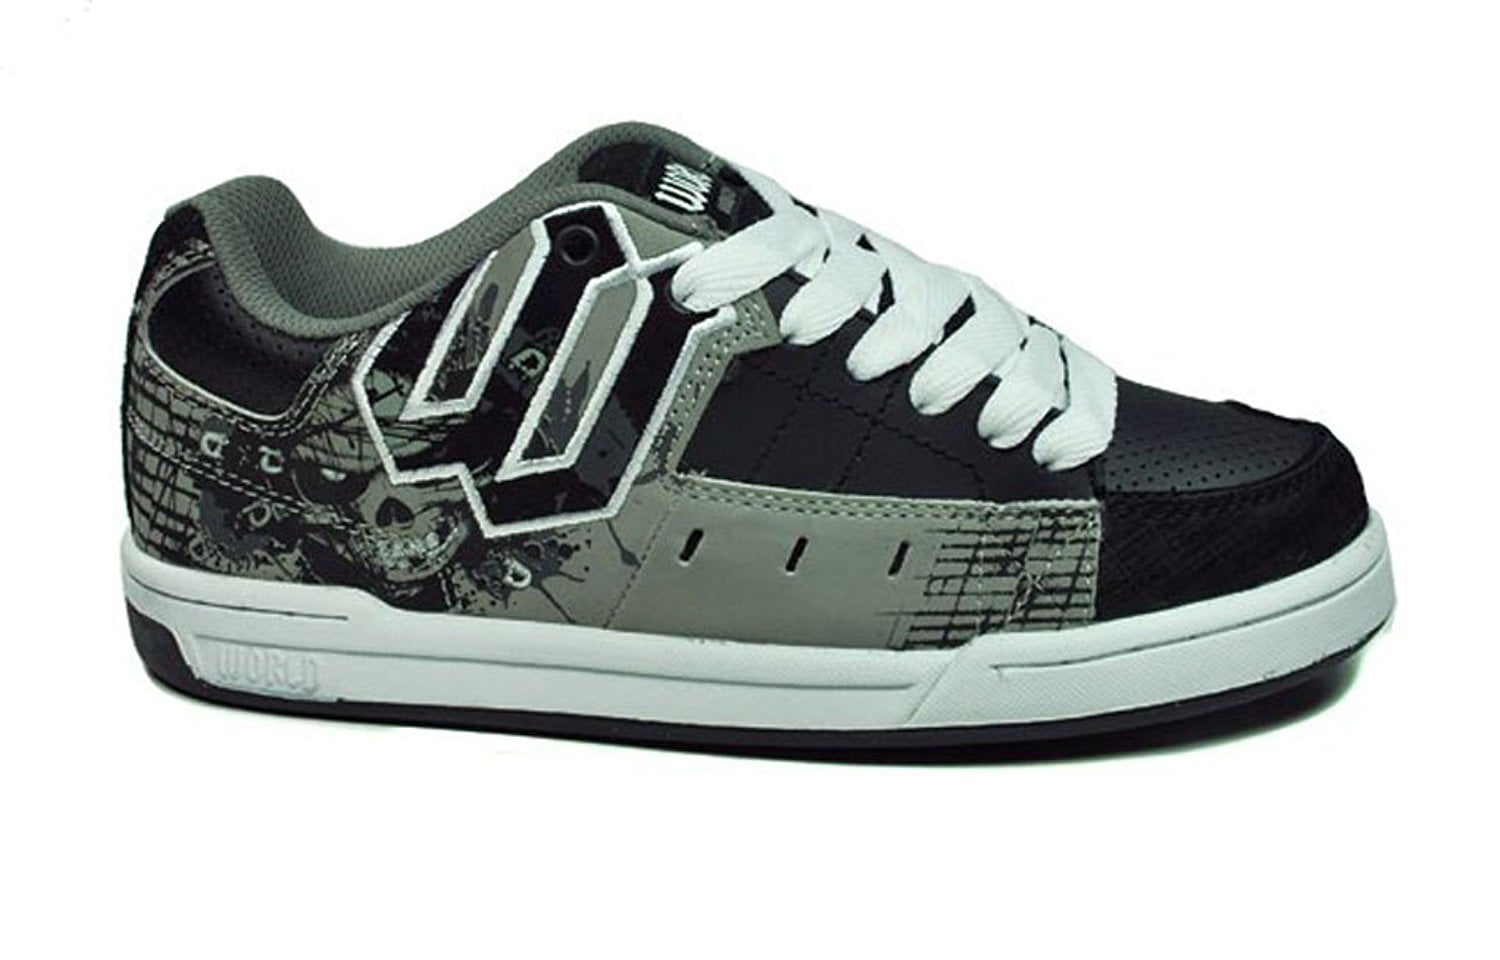 World Industries Shoes Rally Sneakers Trainers Skateboarding Sport Shoes